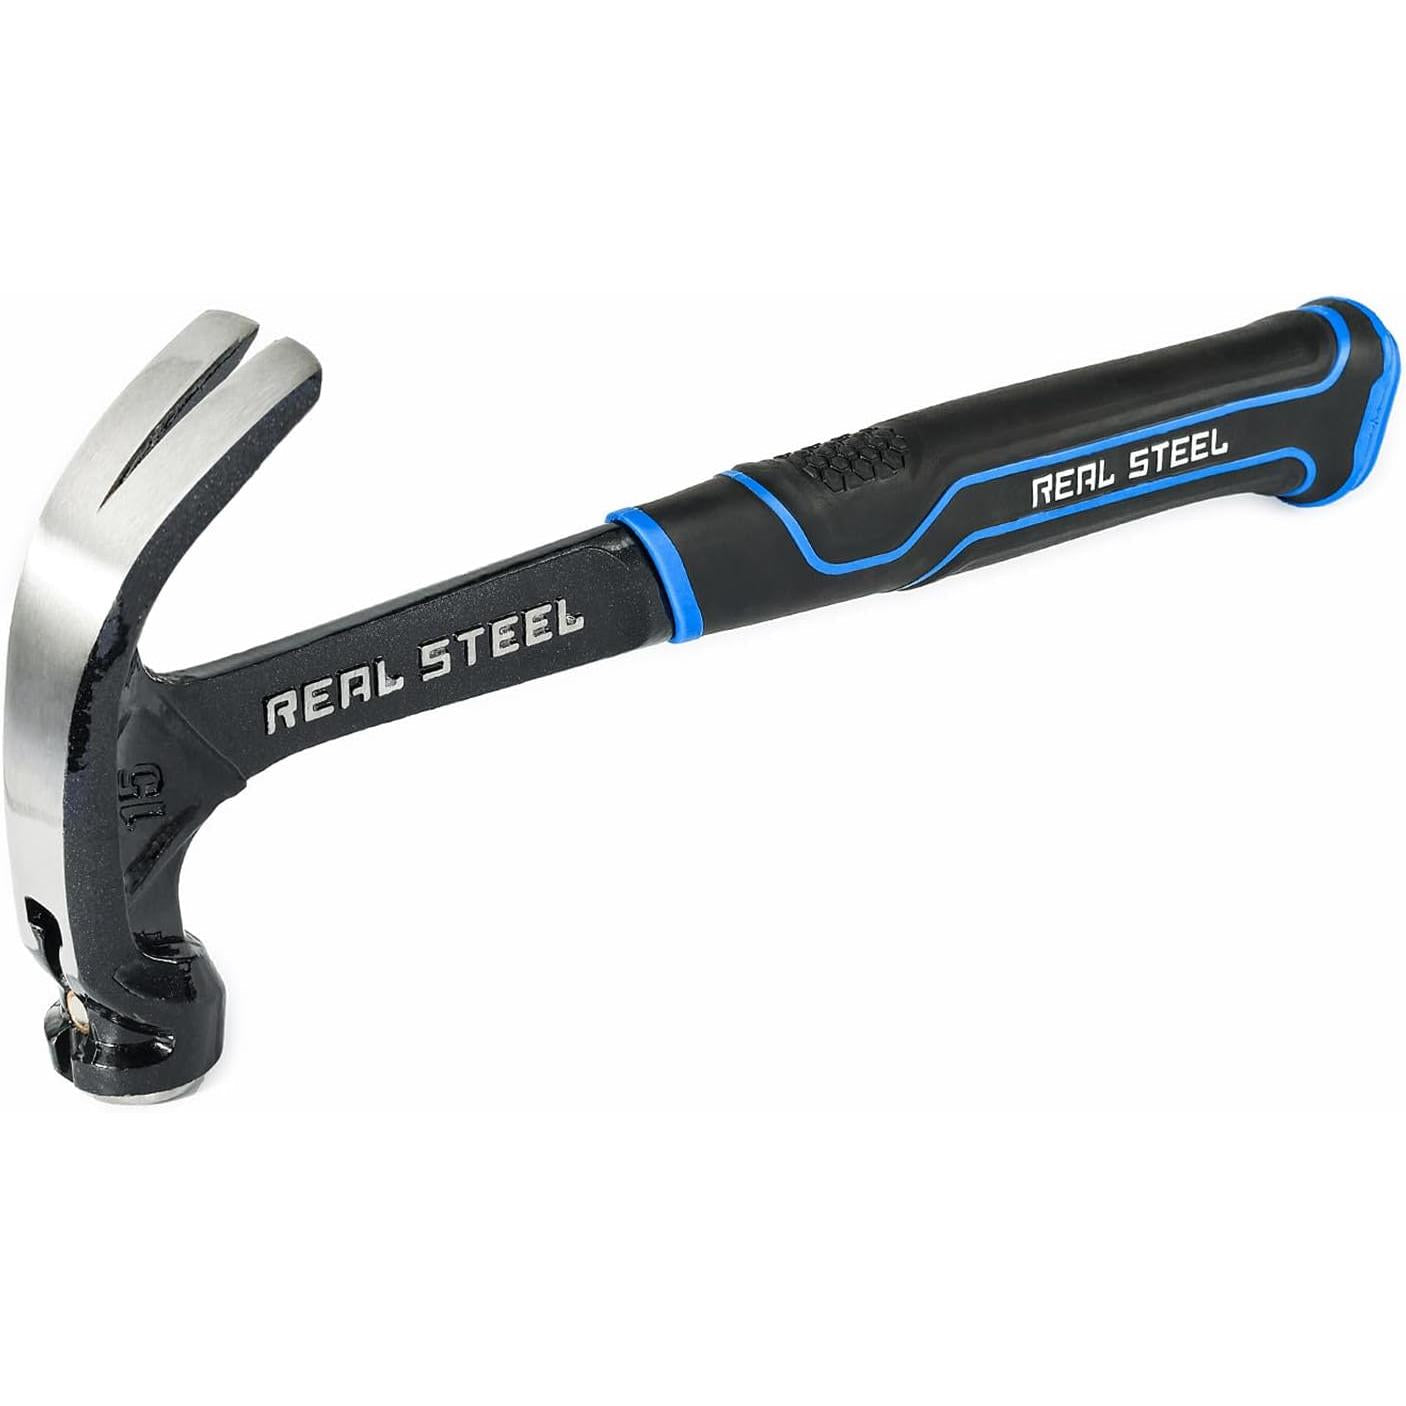 Real Steel Hammer Claw Curved 425g 15oz All Steel Handle Real Steel RSH0516 Power Tool Services